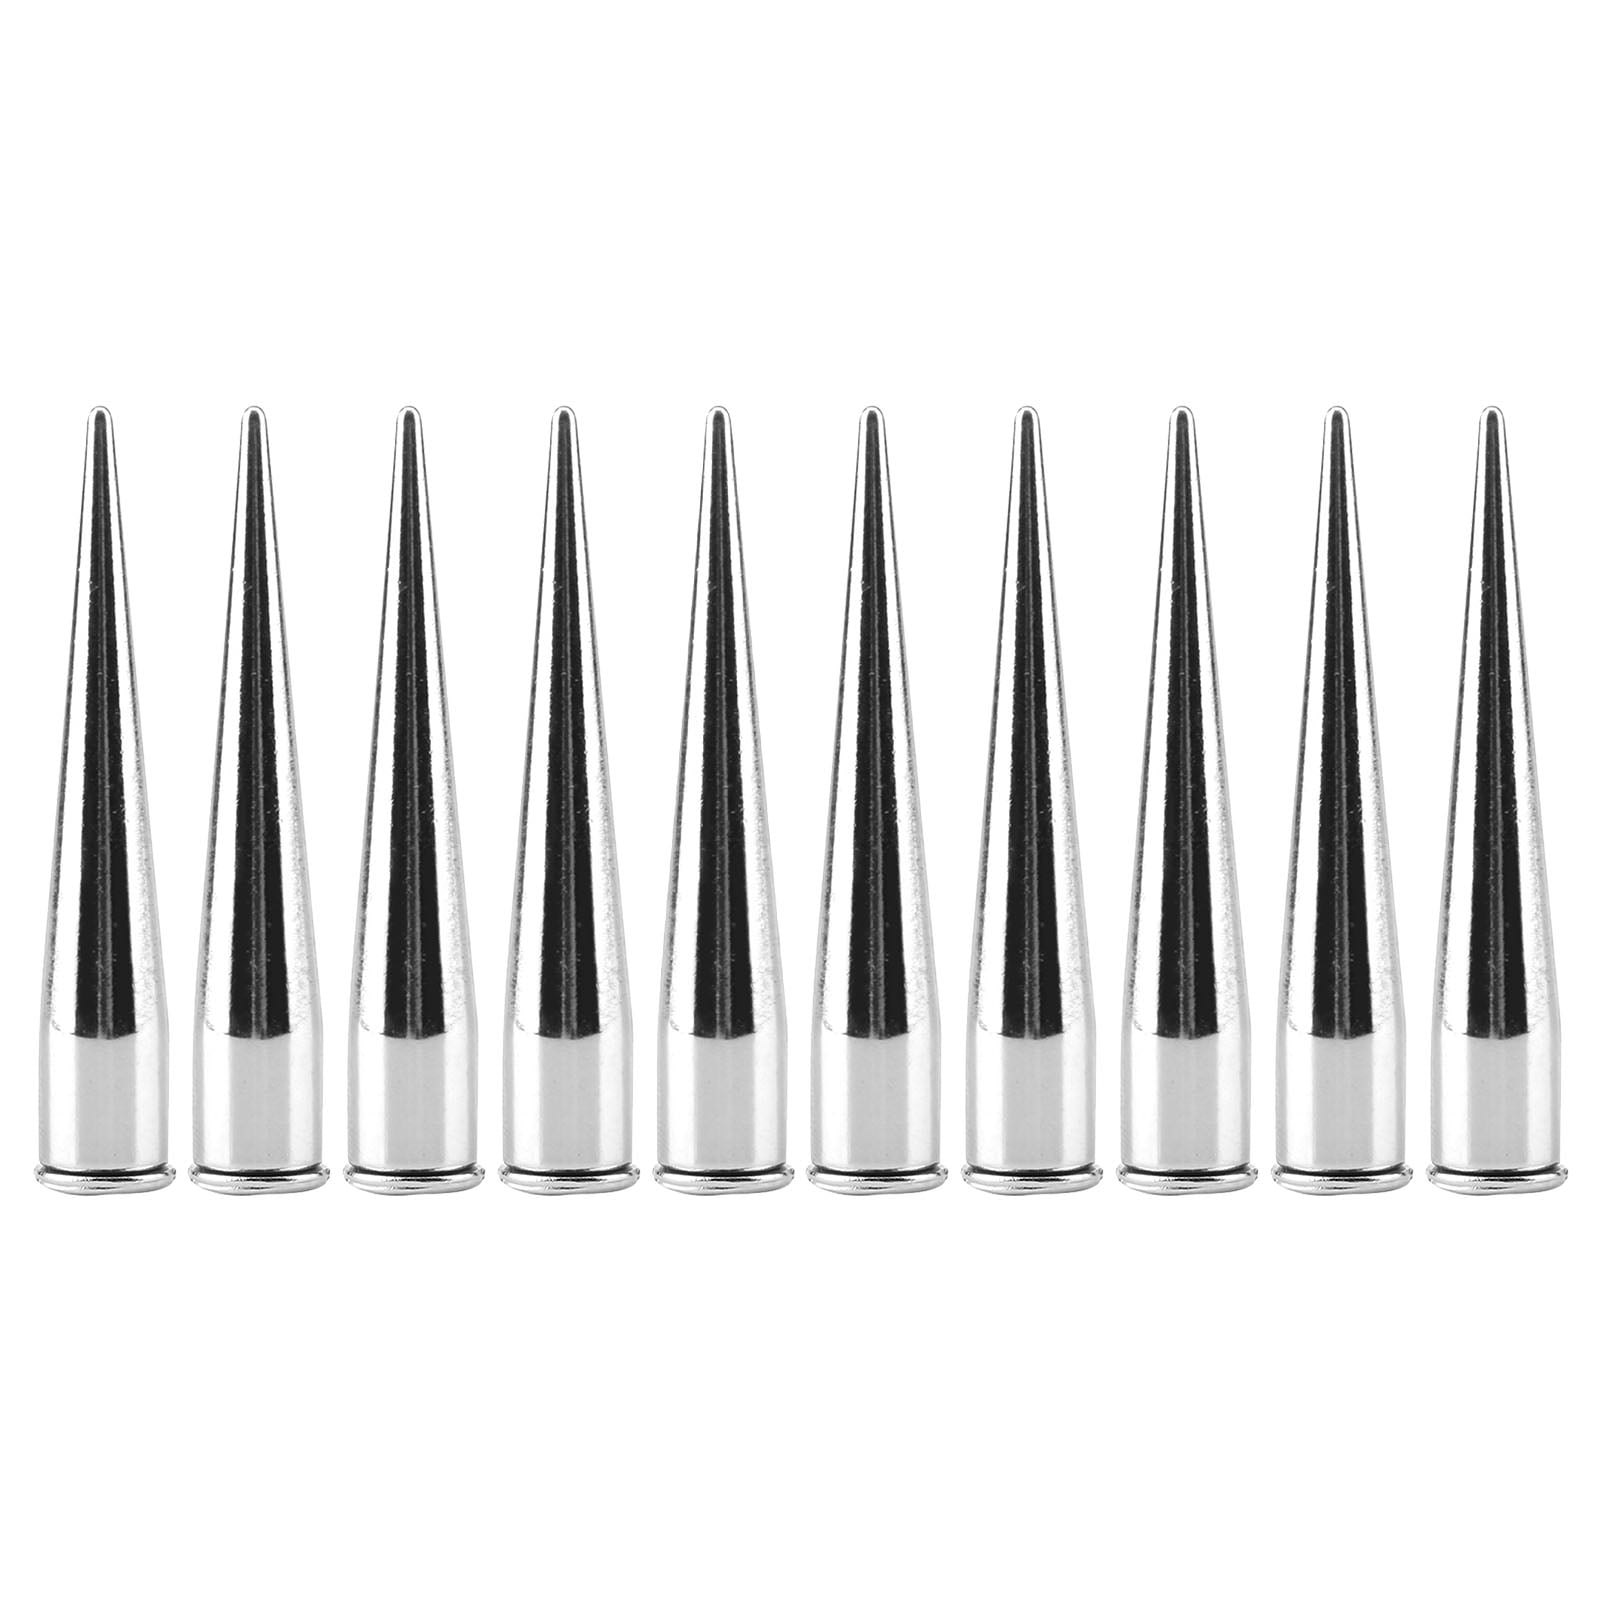  Uviviu 20Pcs 40mm Spikes for Clothing, Long Metal Cone